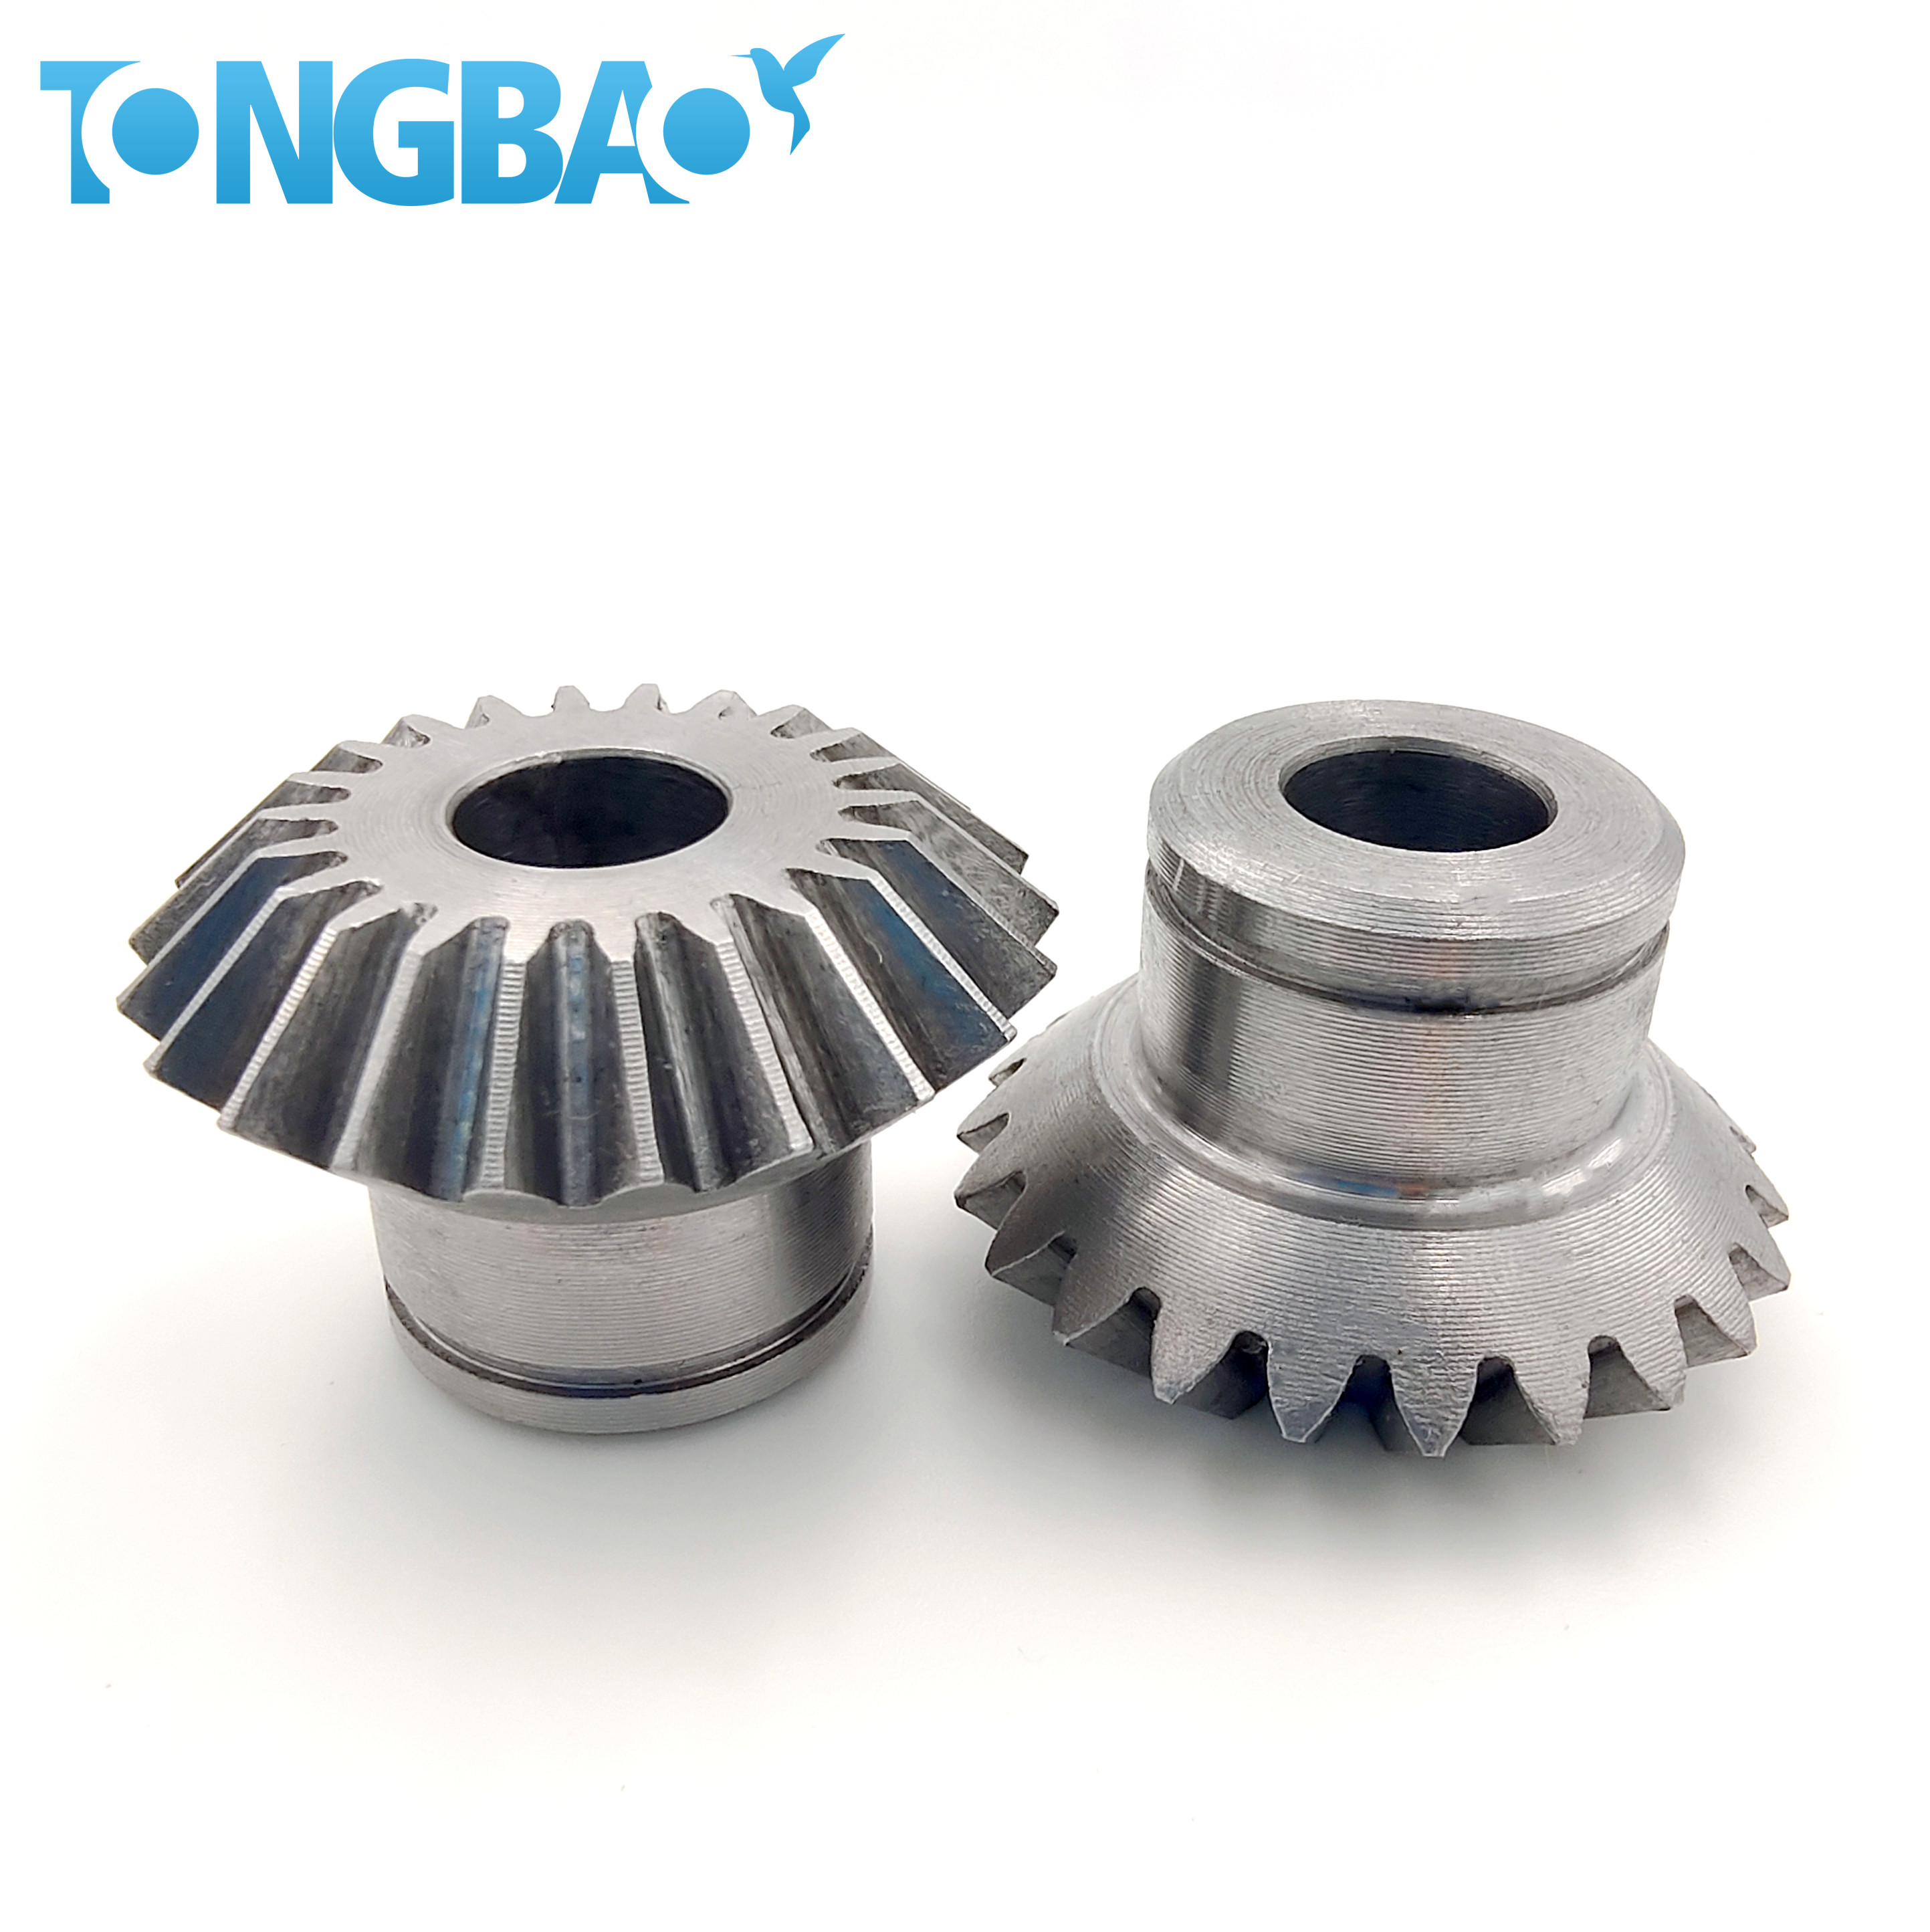 C45/Stainless Zinc Plated 16T/22T/24T Bevel gear Featured Image